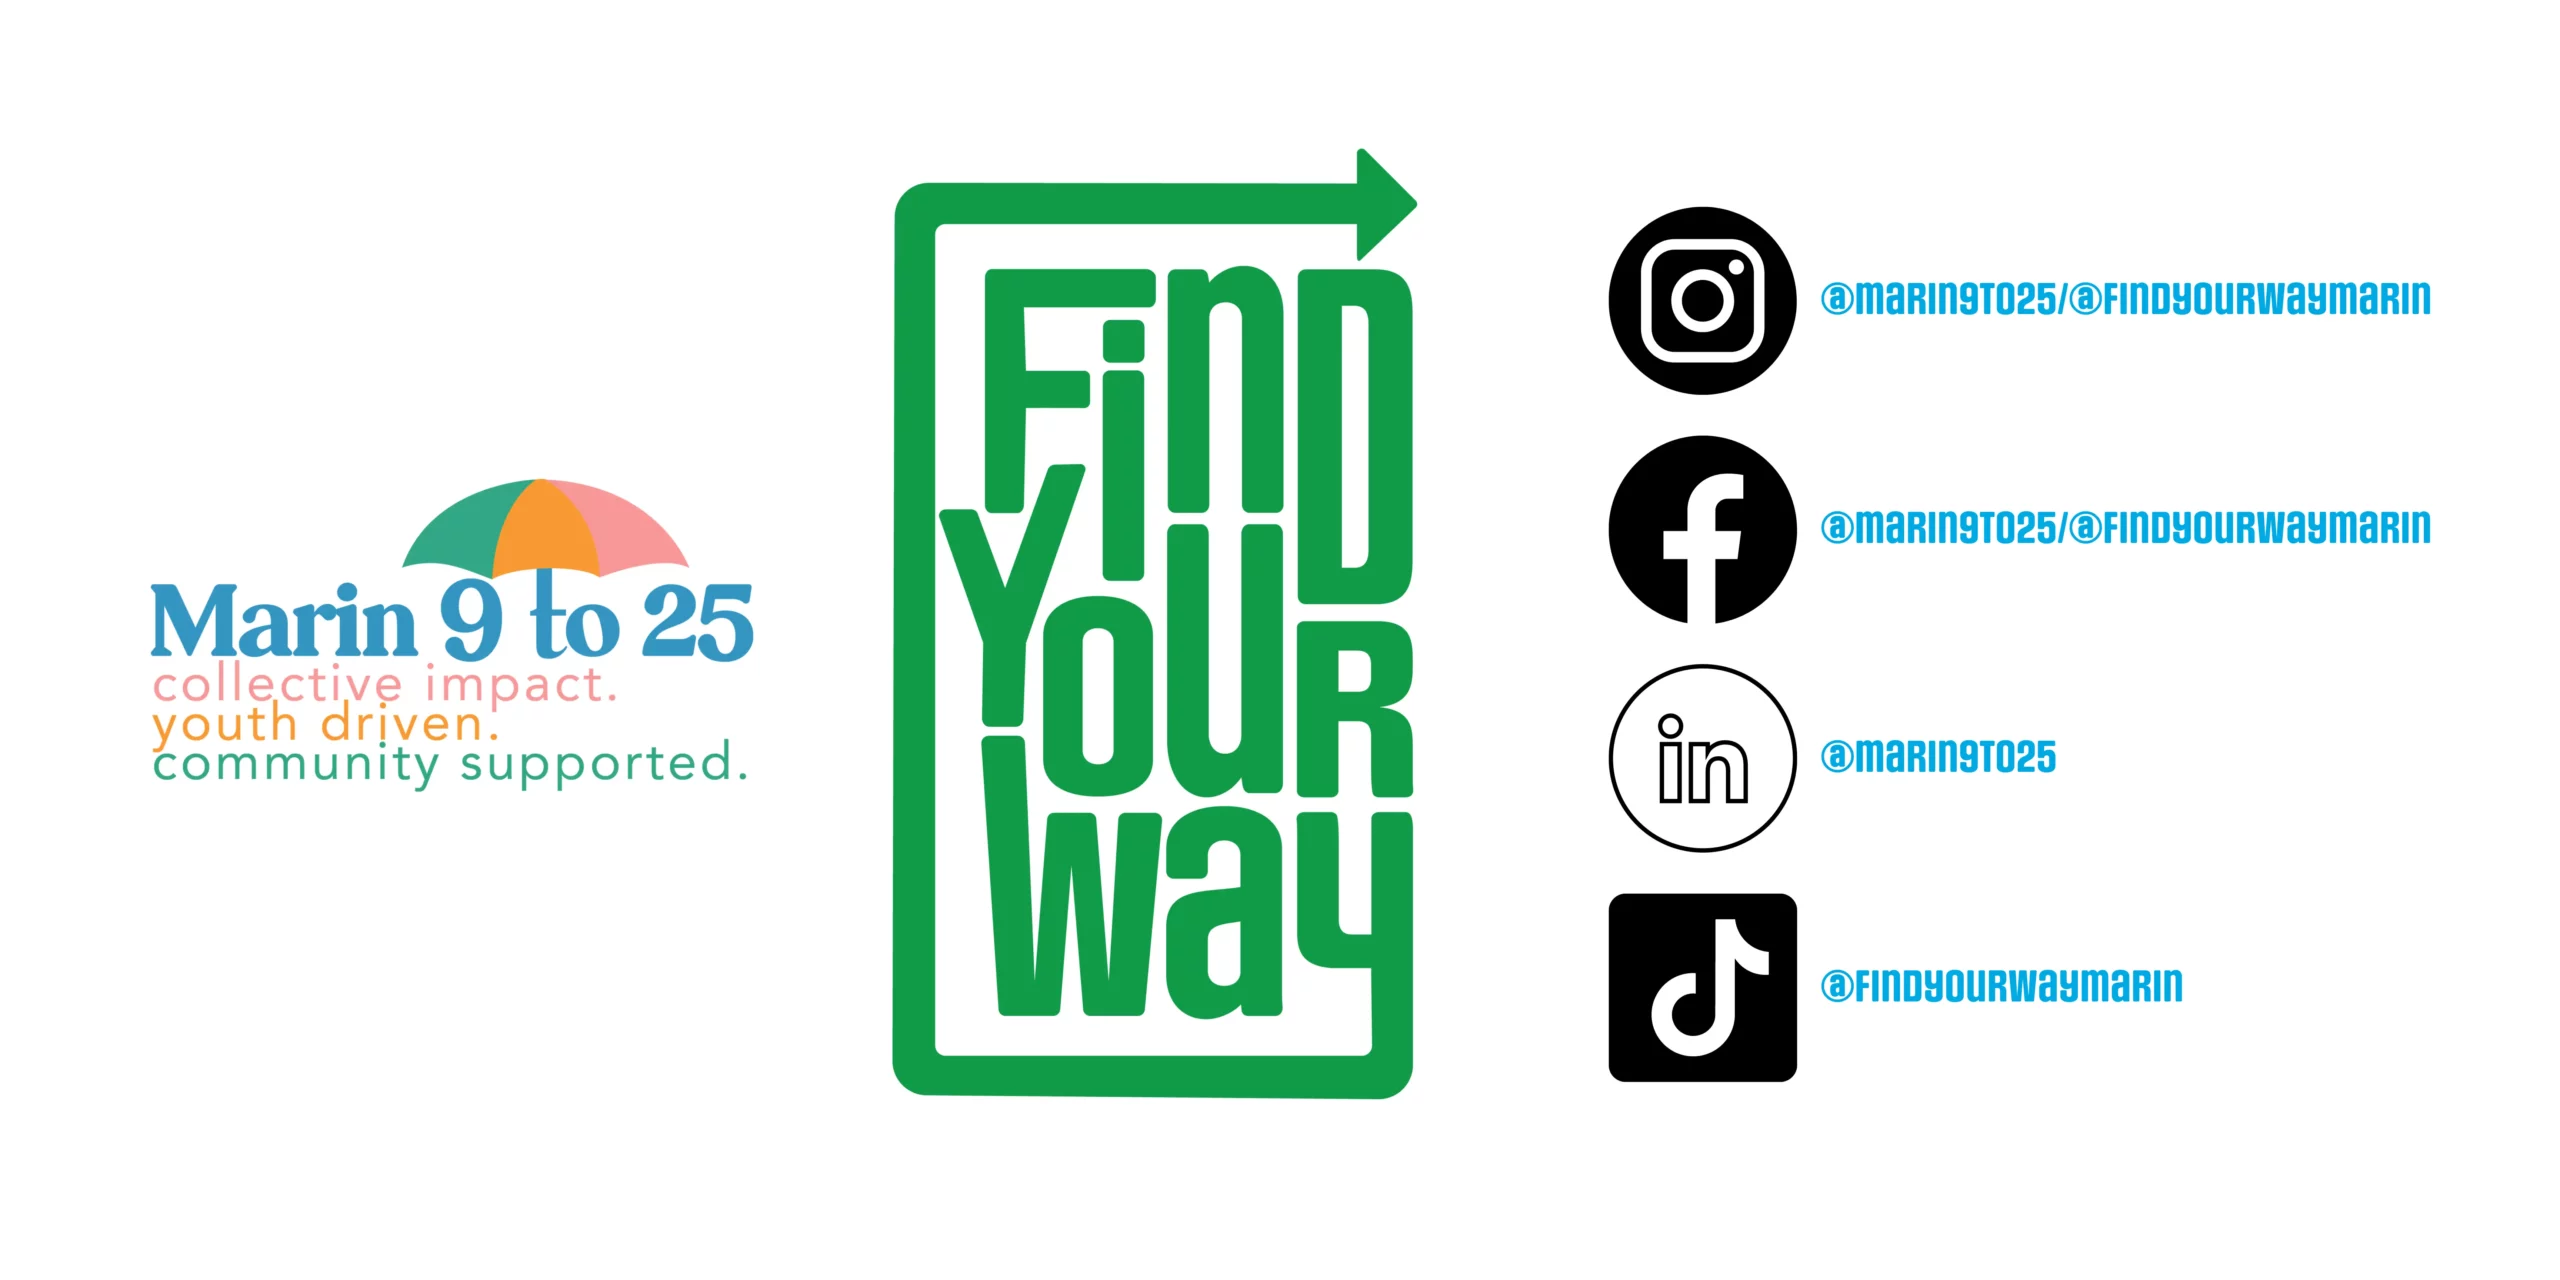 Marin 9 to 25 + find your way logos and social media info